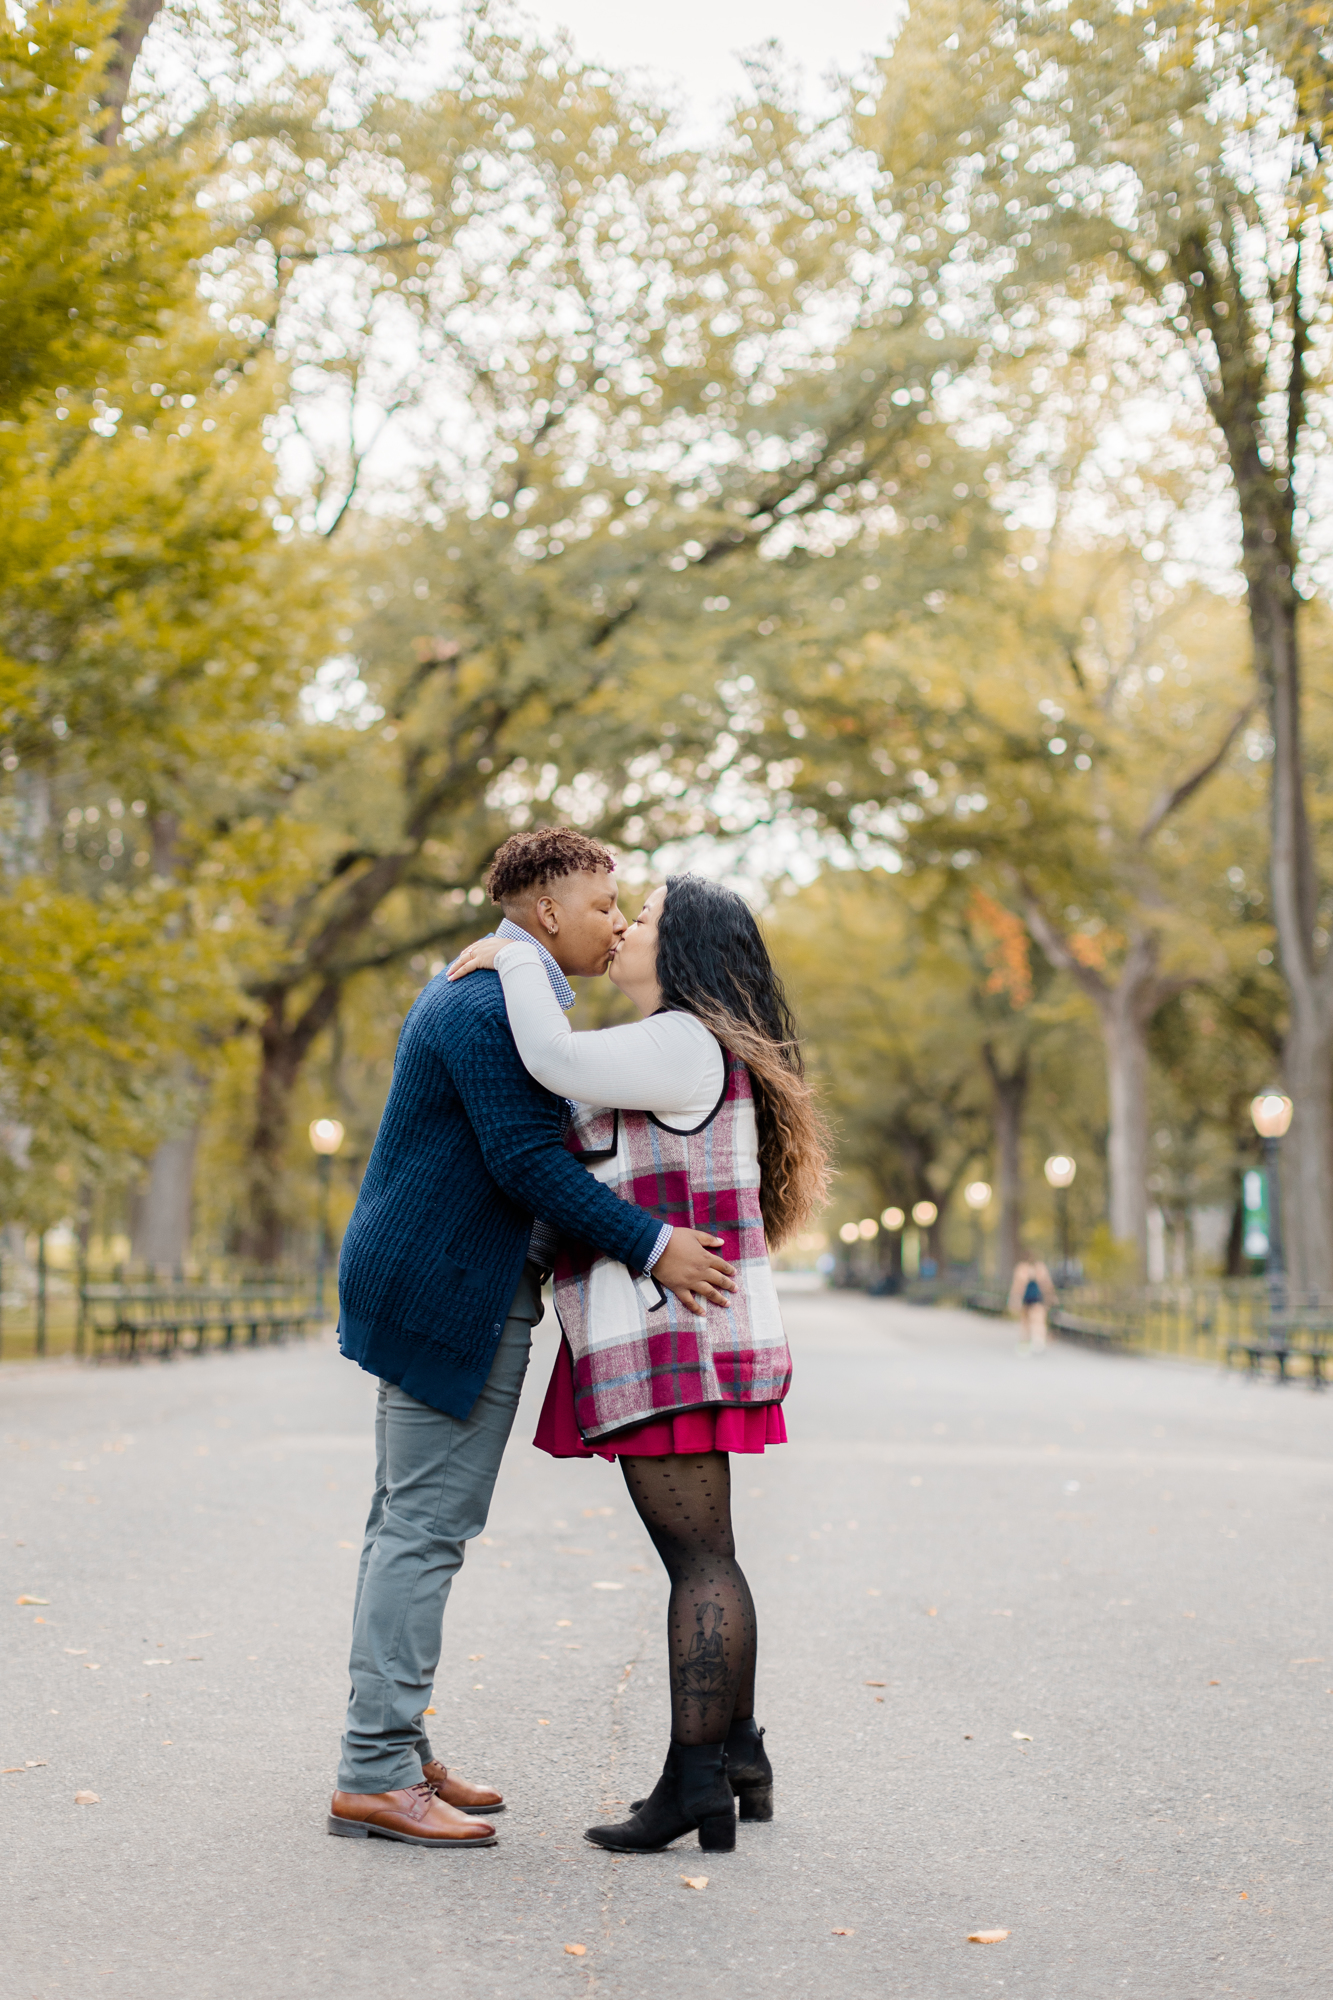 Charming Central Park Engagement Photos in Autumn at Sunrise